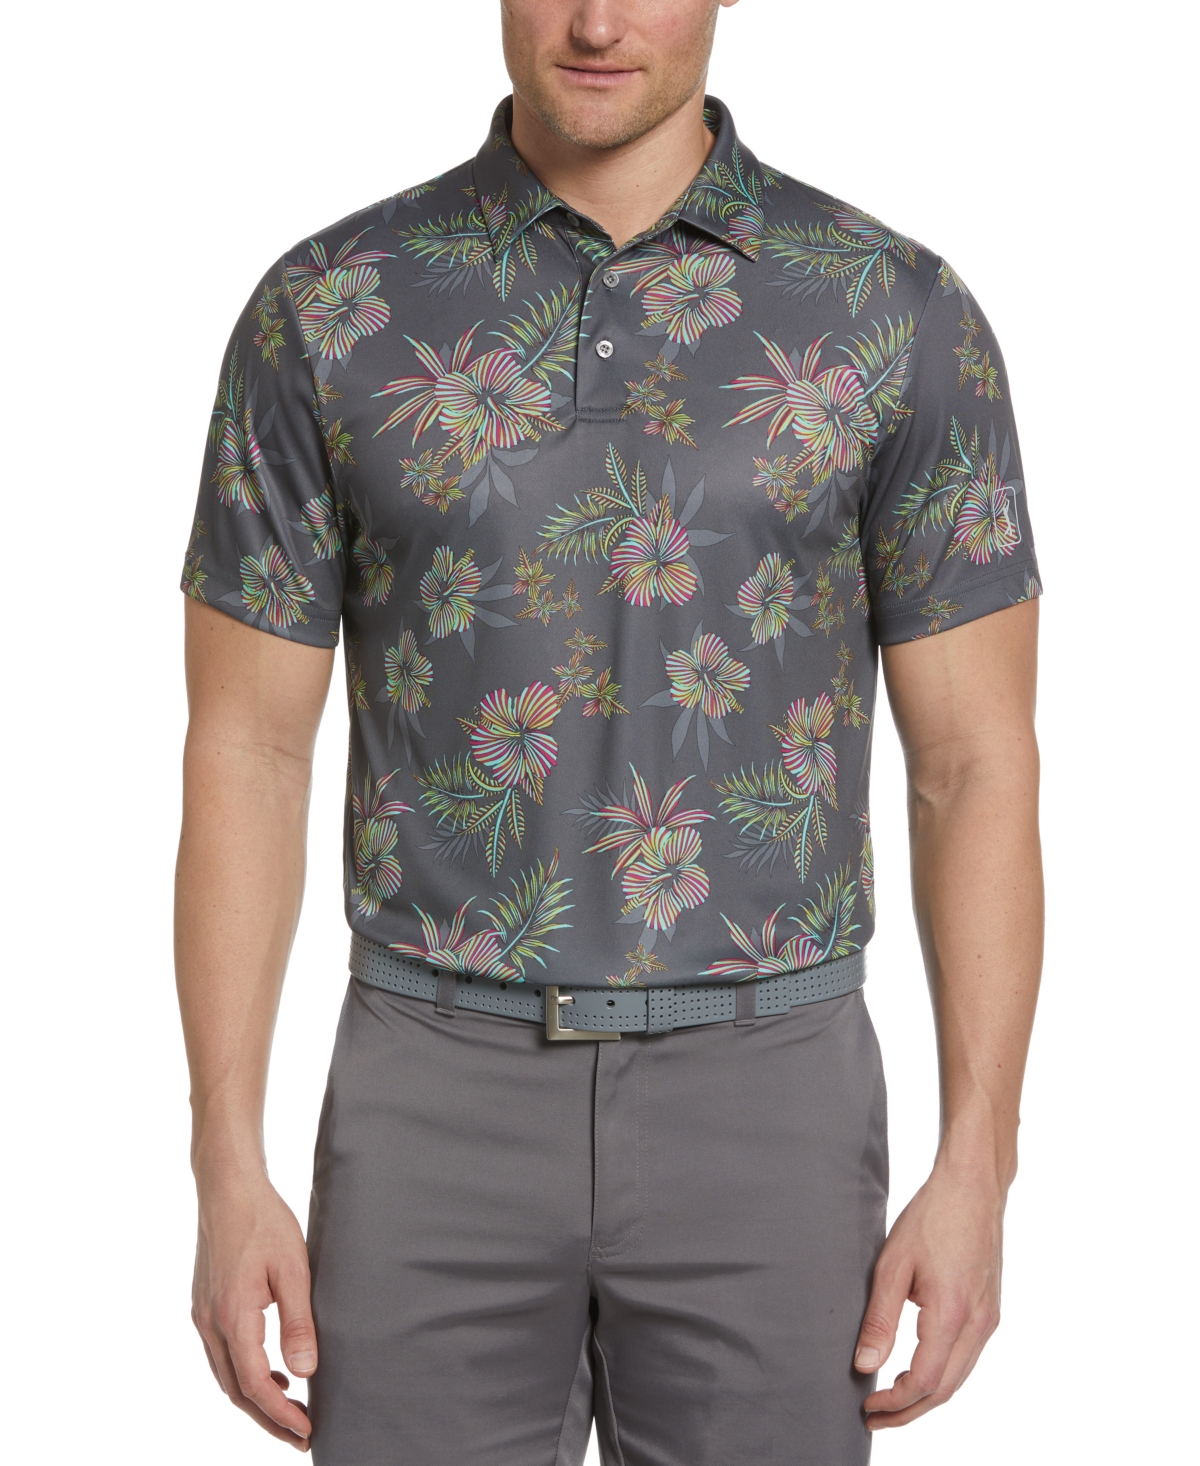 Men's Hibiscus Floral Graphic Polo Shirt - Iron Gate